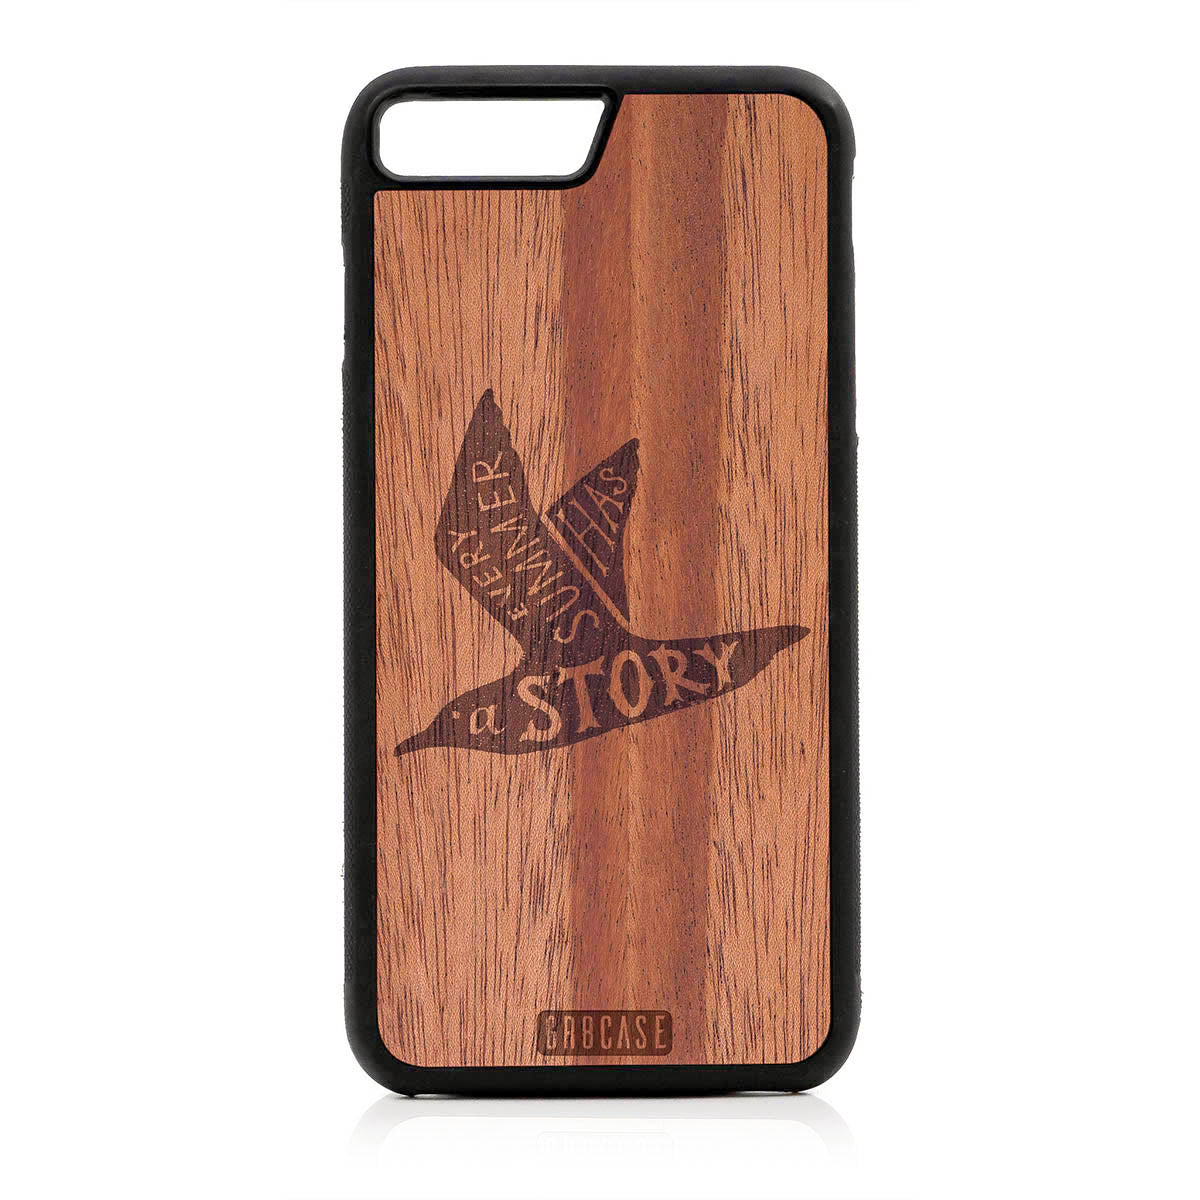 Every Summer Has A Story (Seagull) Design Wood Case For iPhone 7 Plus / 8 Plus